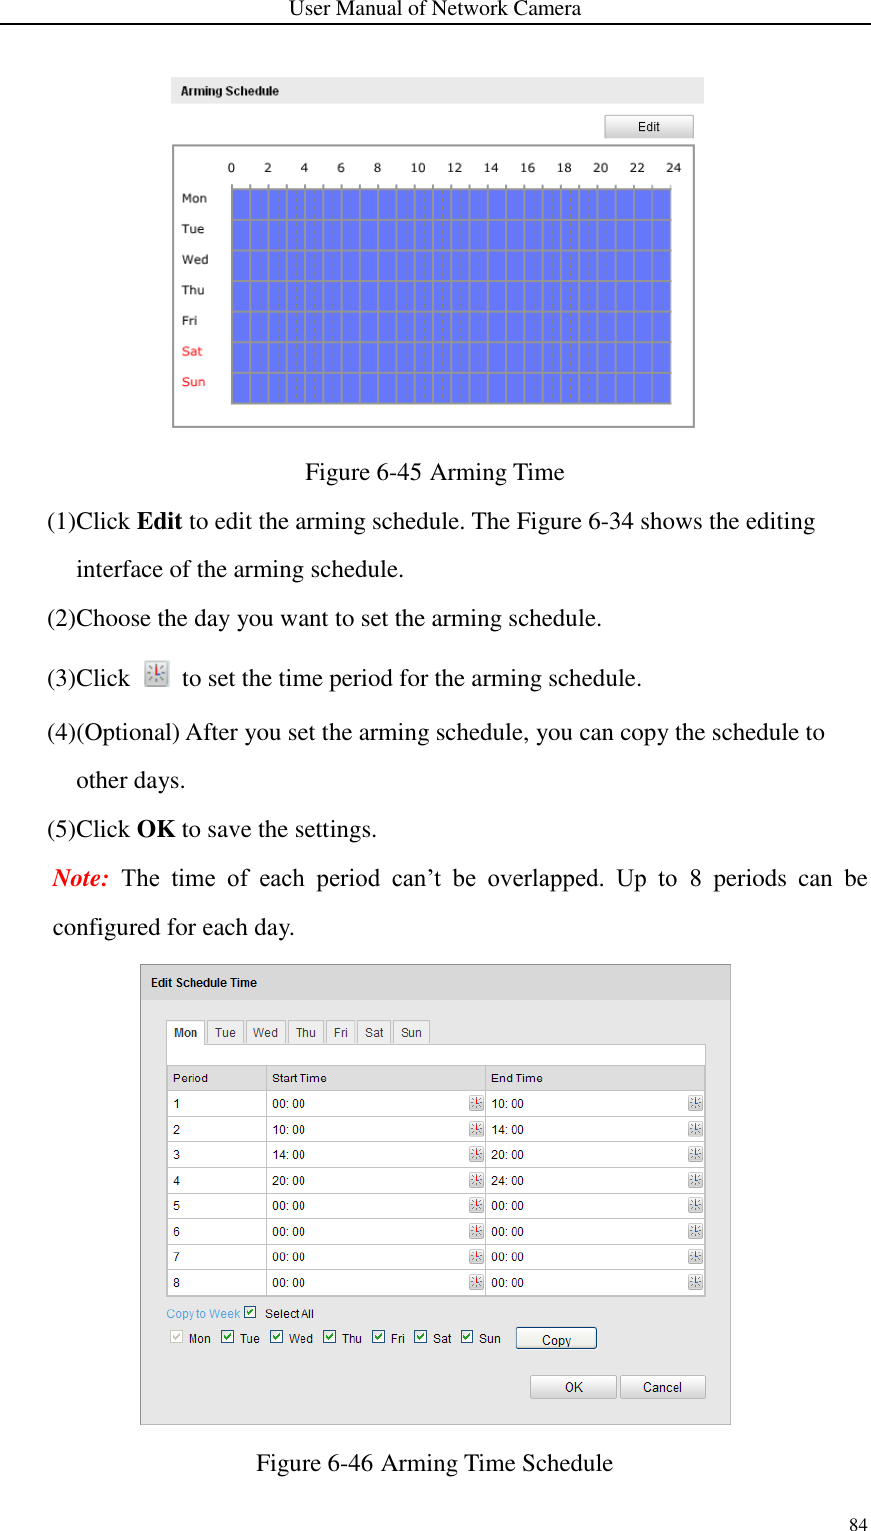 User Manual of Network Camera 84   Figure 6-45 Arming Time (1)Click Edit to edit the arming schedule. The Figure 6-34 shows the editing interface of the arming schedule. (2)Choose the day you want to set the arming schedule. (3)Click    to set the time period for the arming schedule. (4)(Optional) After you set the arming schedule, you can copy the schedule to other days.   (5)Click OK to save the settings. Note:  The  time  of  each  period  can’t  be  overlapped.  Up  to  8  periods  can  be configured for each day.  Figure 6-46 Arming Time Schedule 